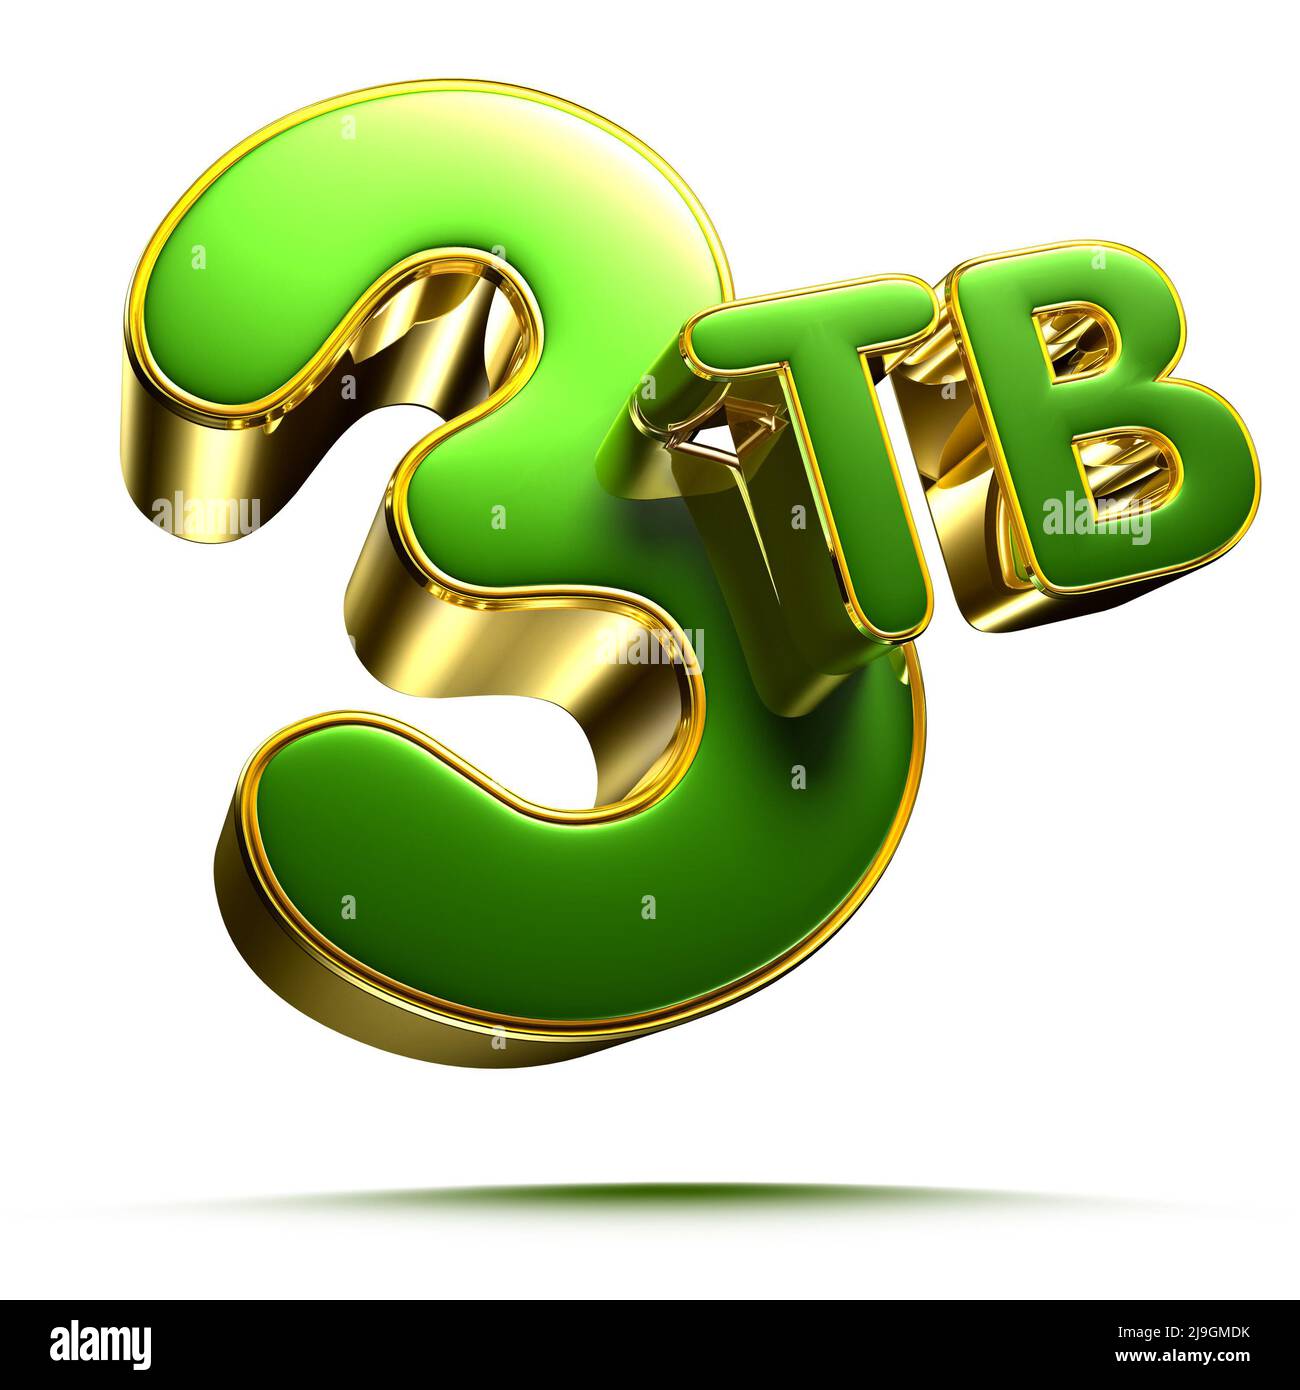 3 TB green with gold side borders 3D illustration on white background have work path. Stock Photo